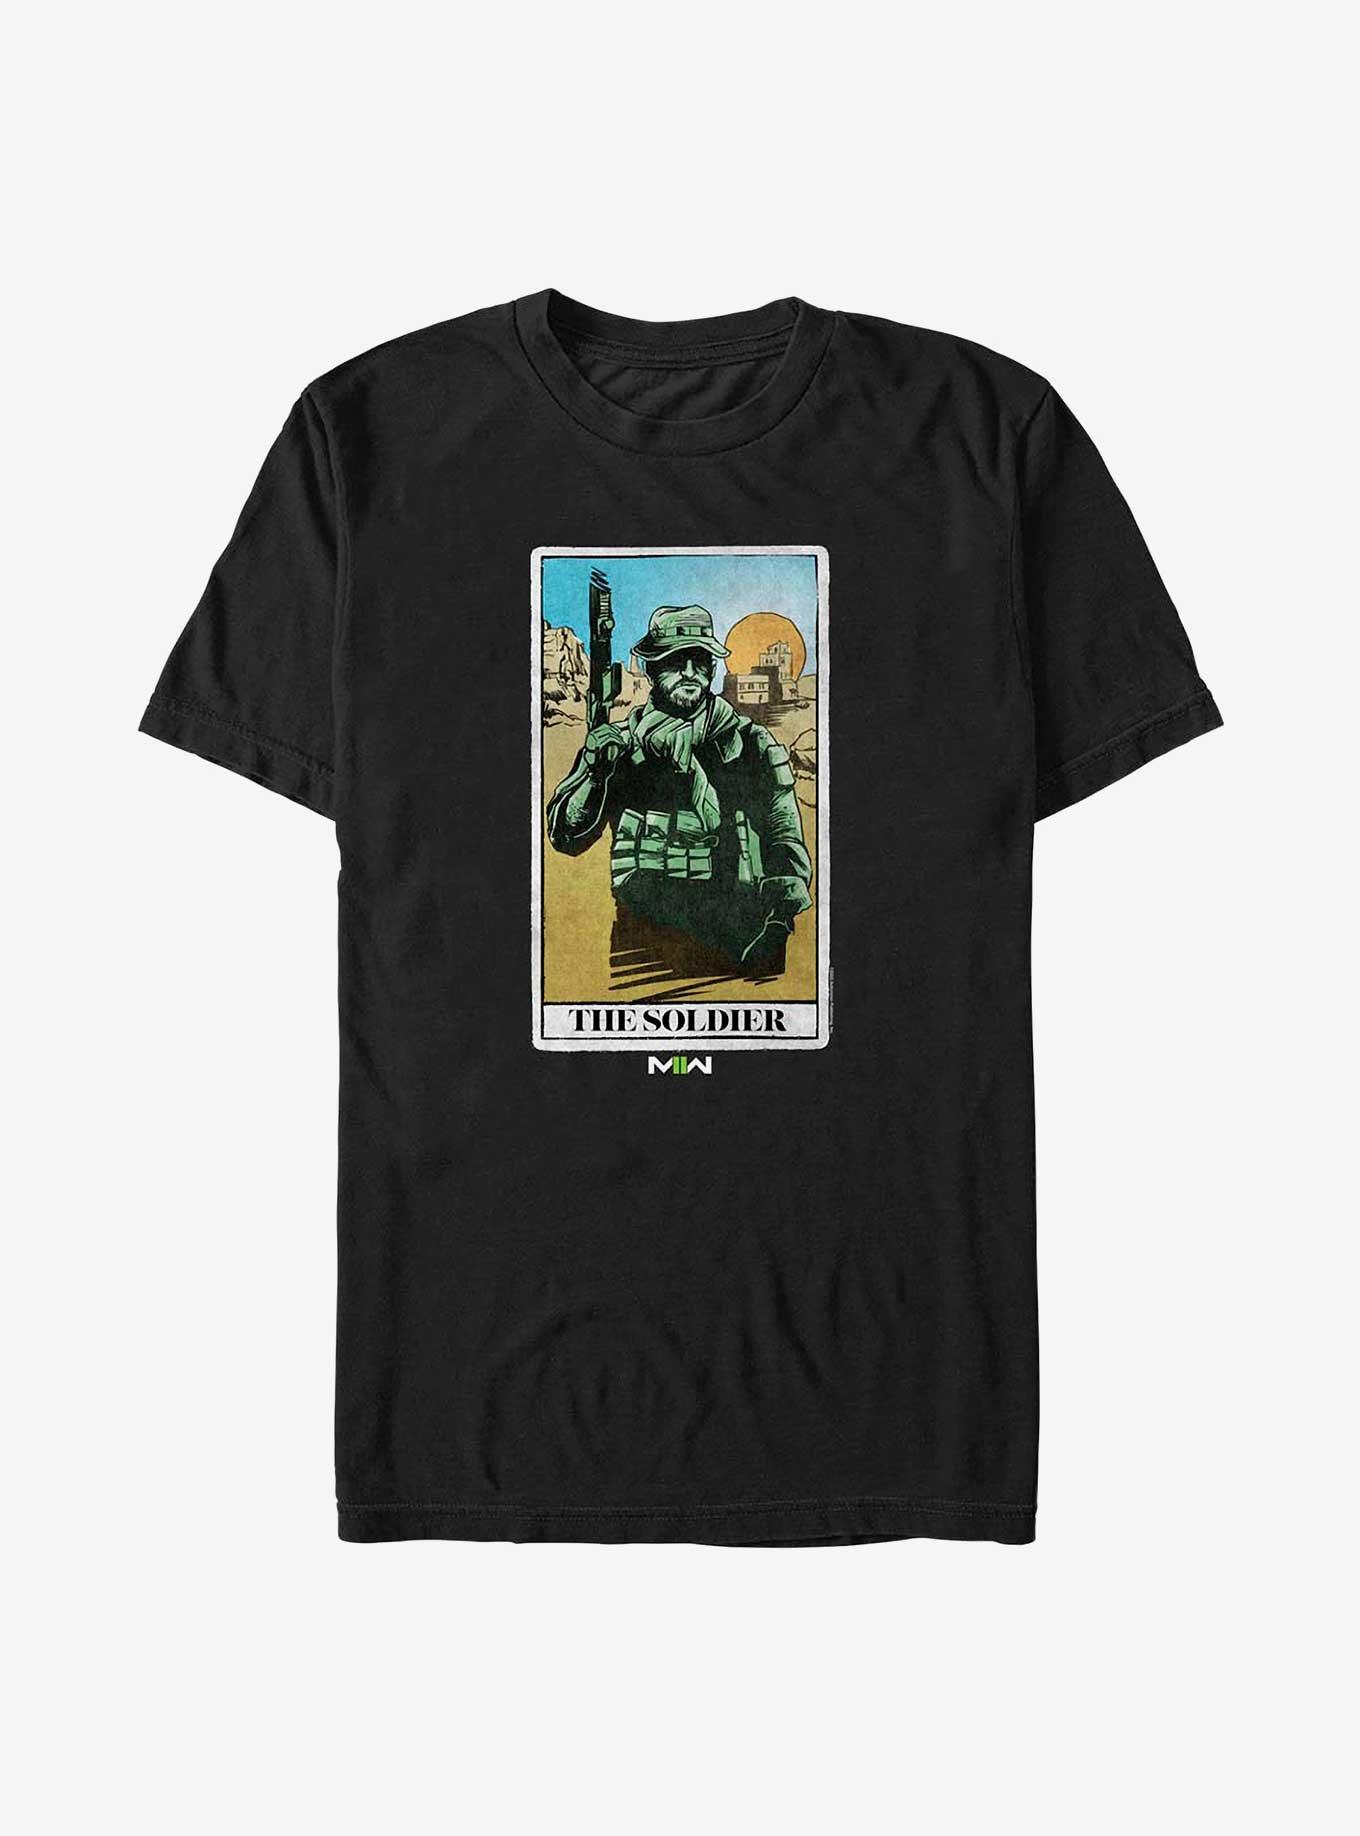 Call of Duty The Soldier Card T-Shirt, BLACK, hi-res